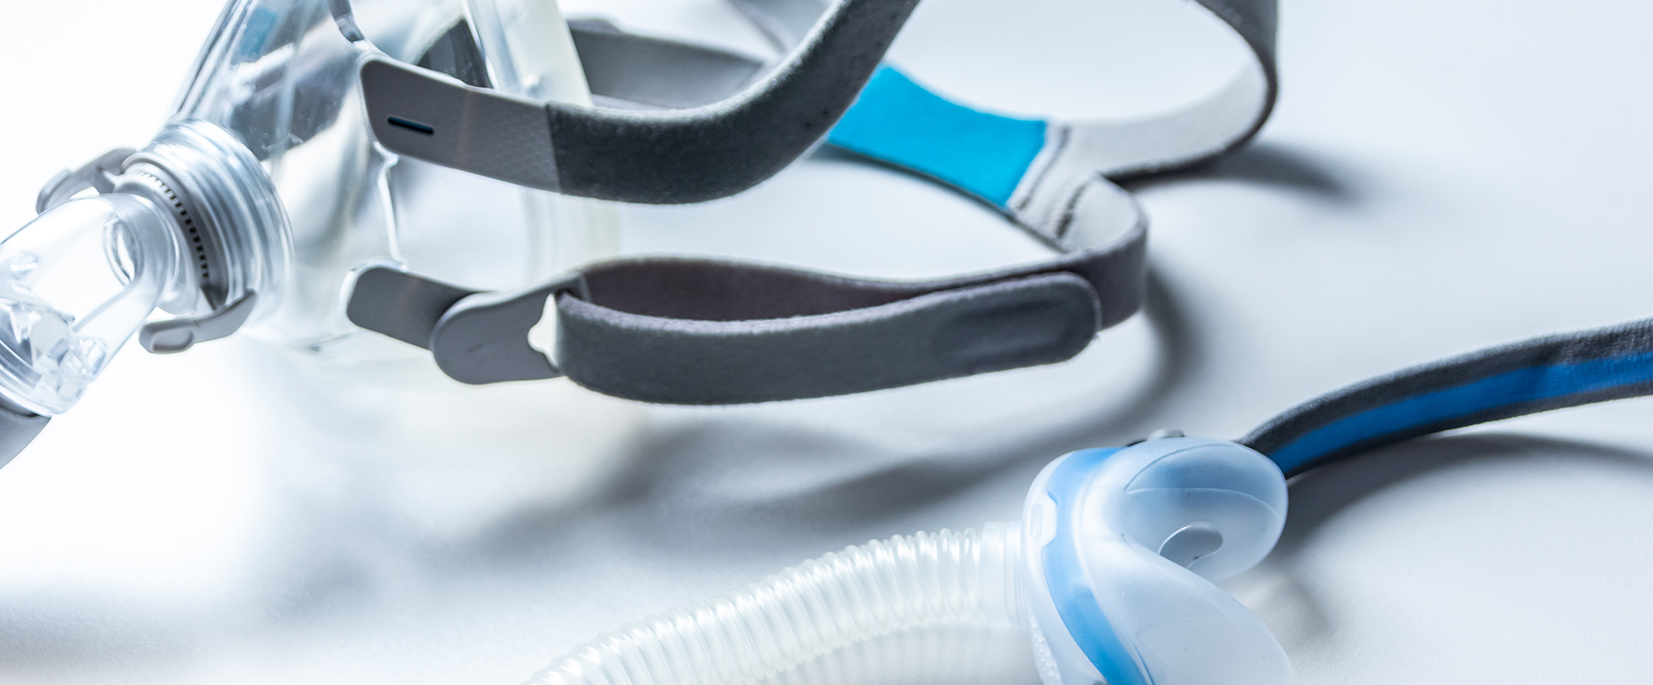 What You Should Know About Nasal CPAP Masks